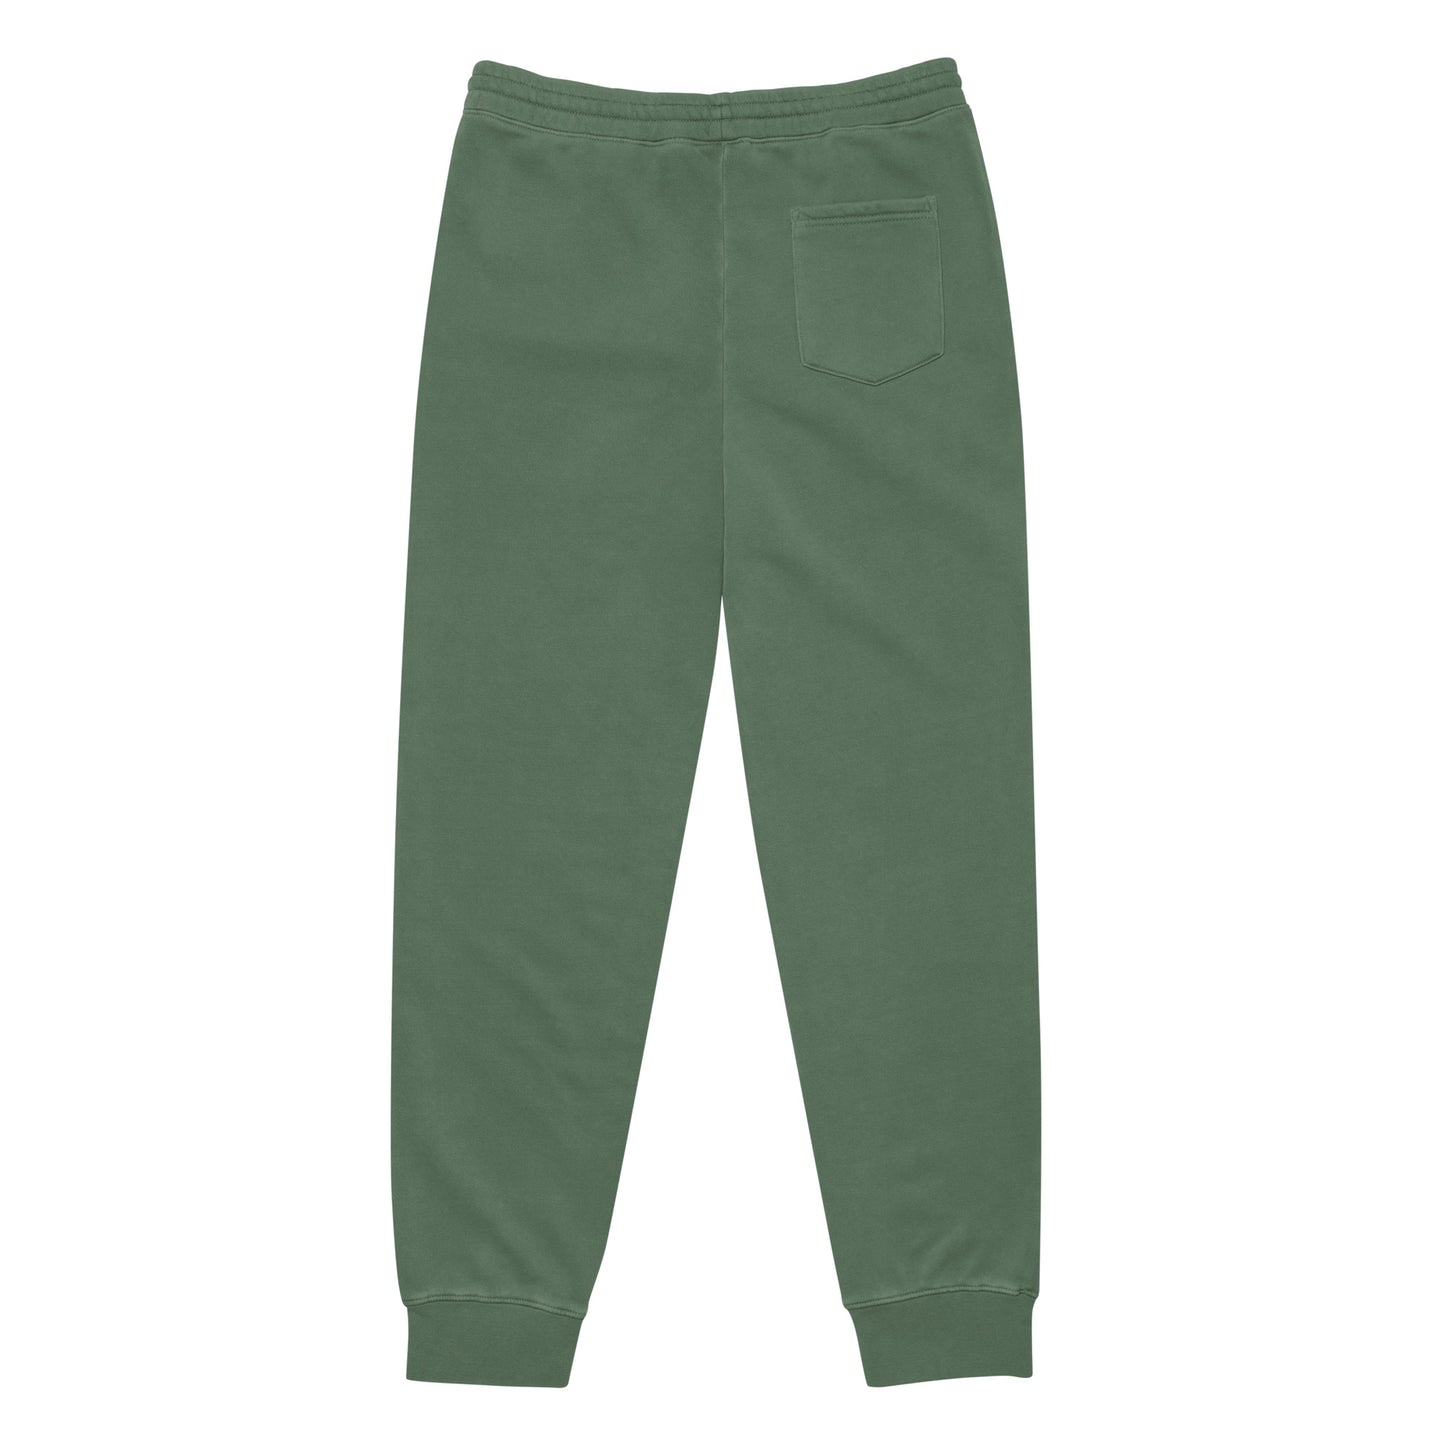 Superstar Star Embroidered Joggers - Green